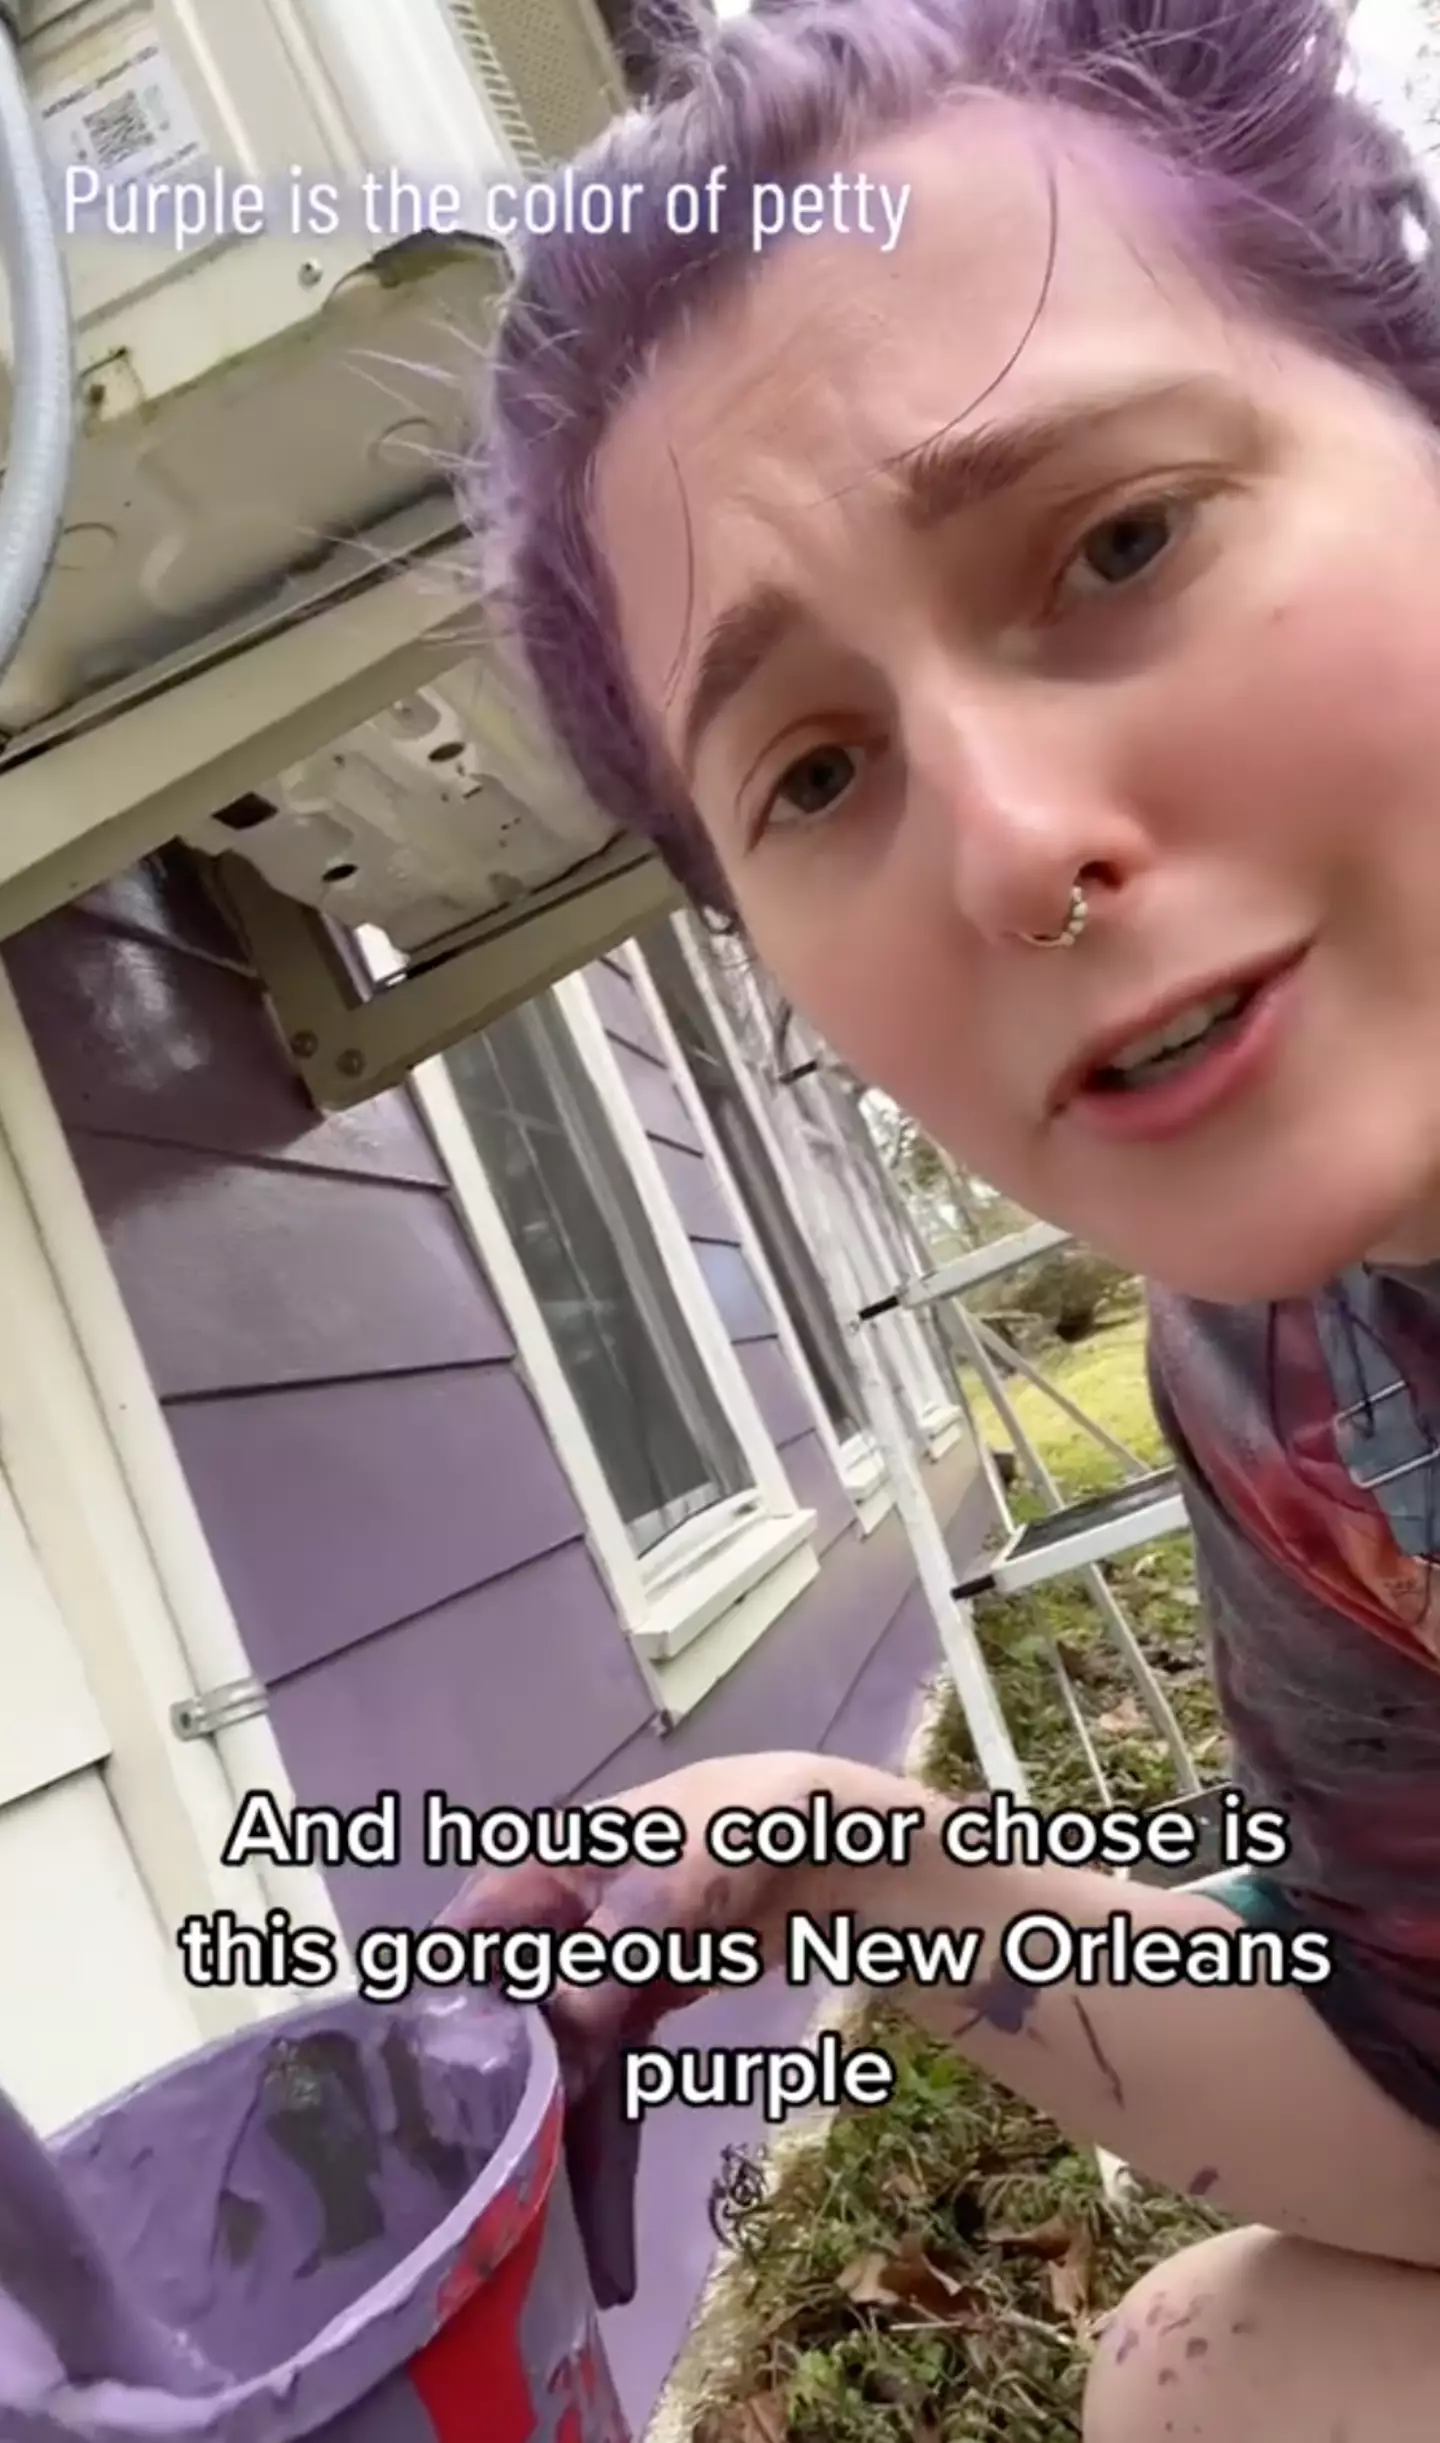 So, she's painting MORE purple onto the house.